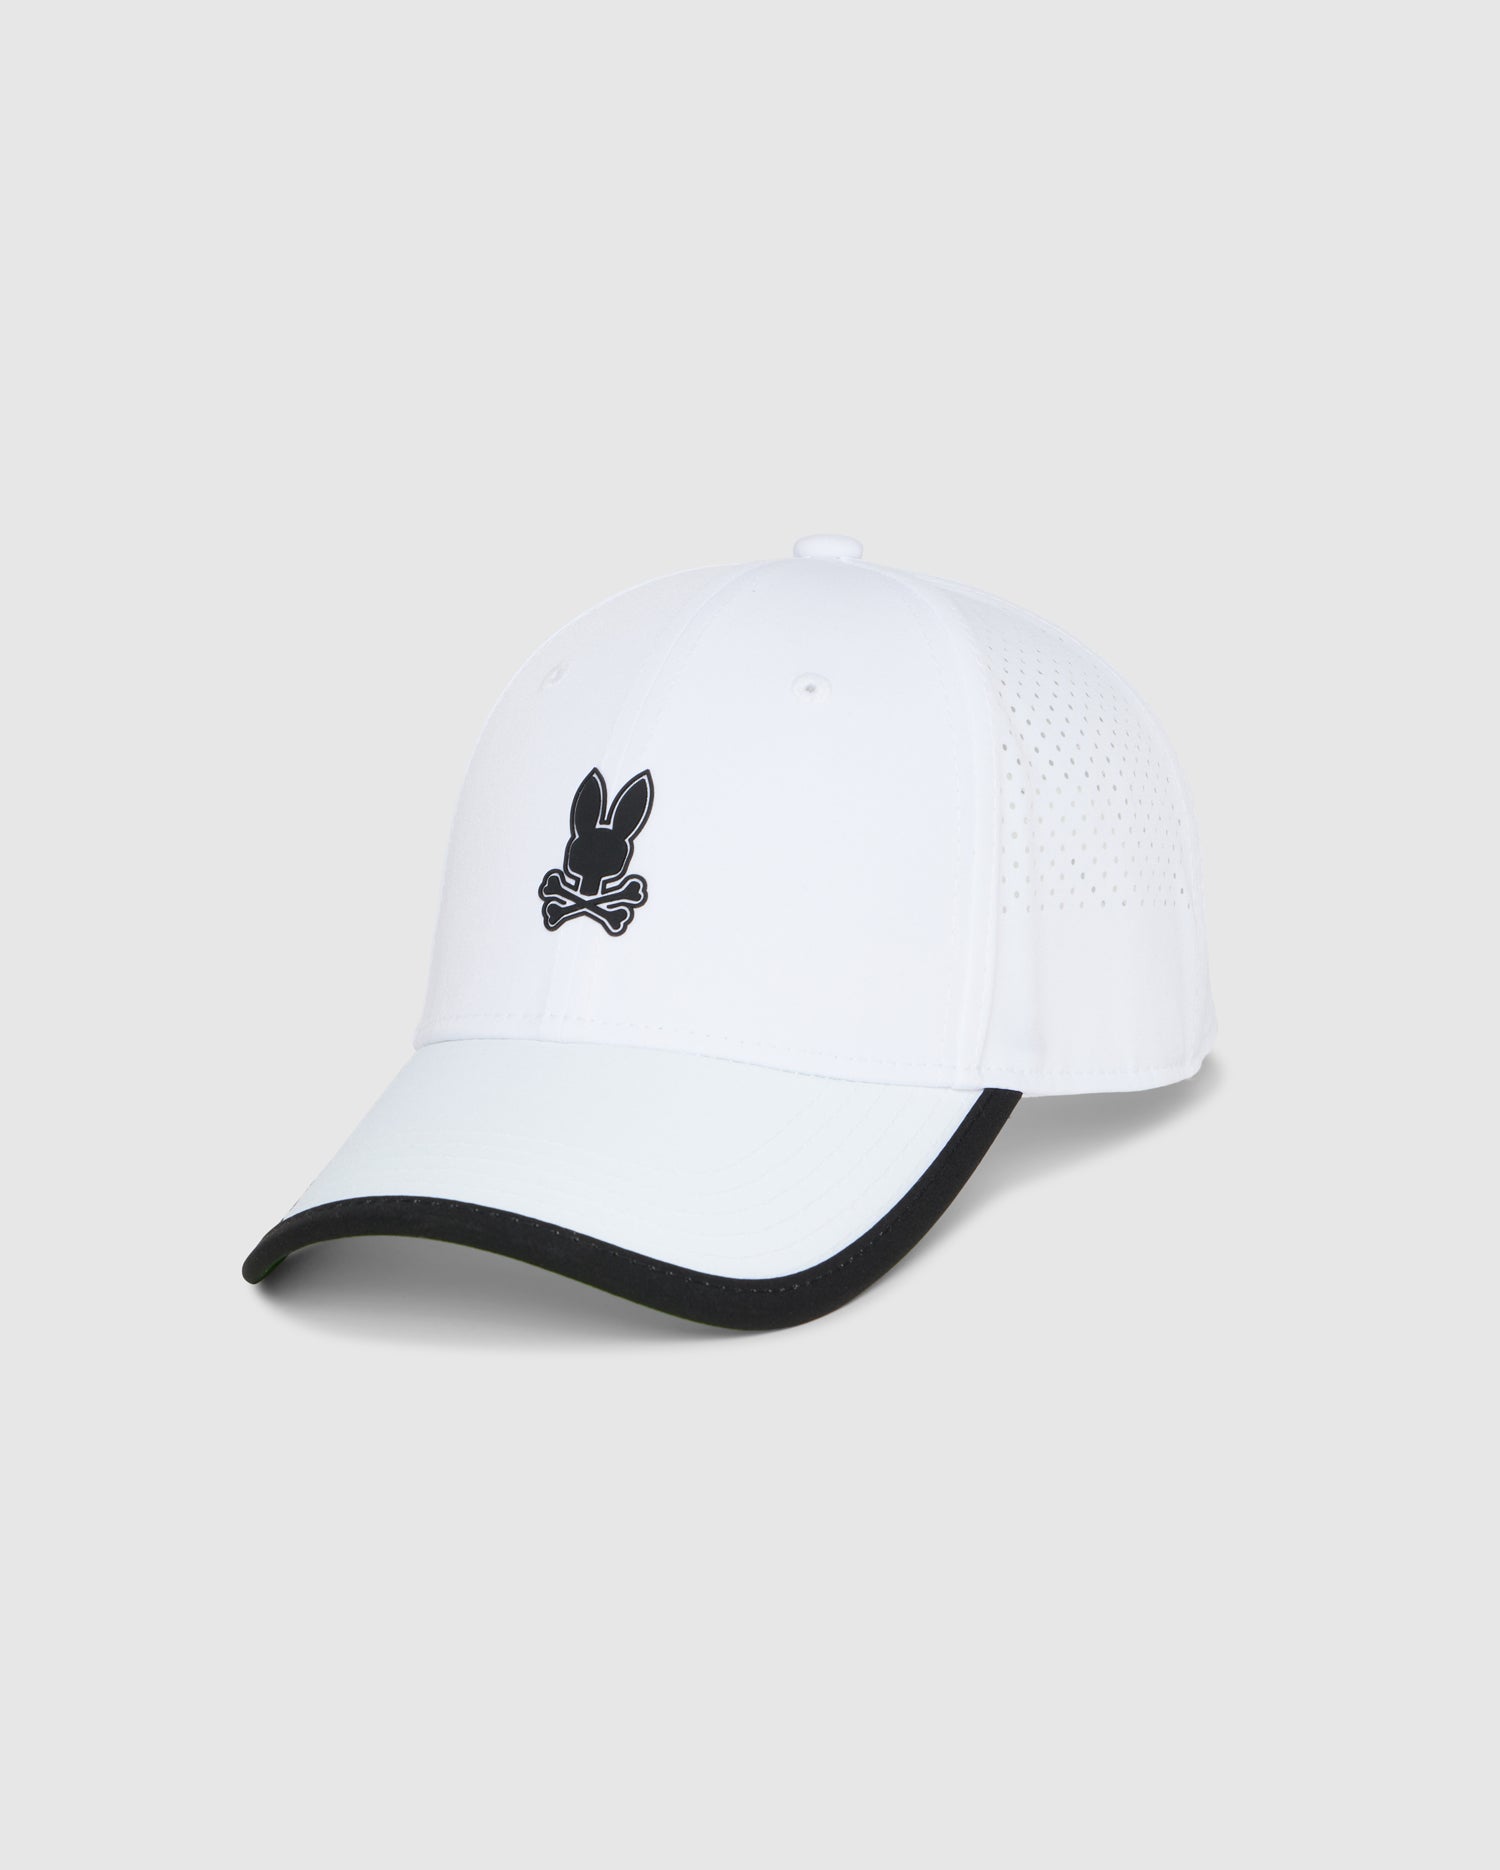 A Psycho Bunny MENS LUCAS SPORT CAP - B6A590C200 featuring a black brim and an embroidered black bunny logo with crossed bones underneath on the front. Made from moisture-wicking, technical fabric, it also has a perforated design for ventilation on the sides and back.